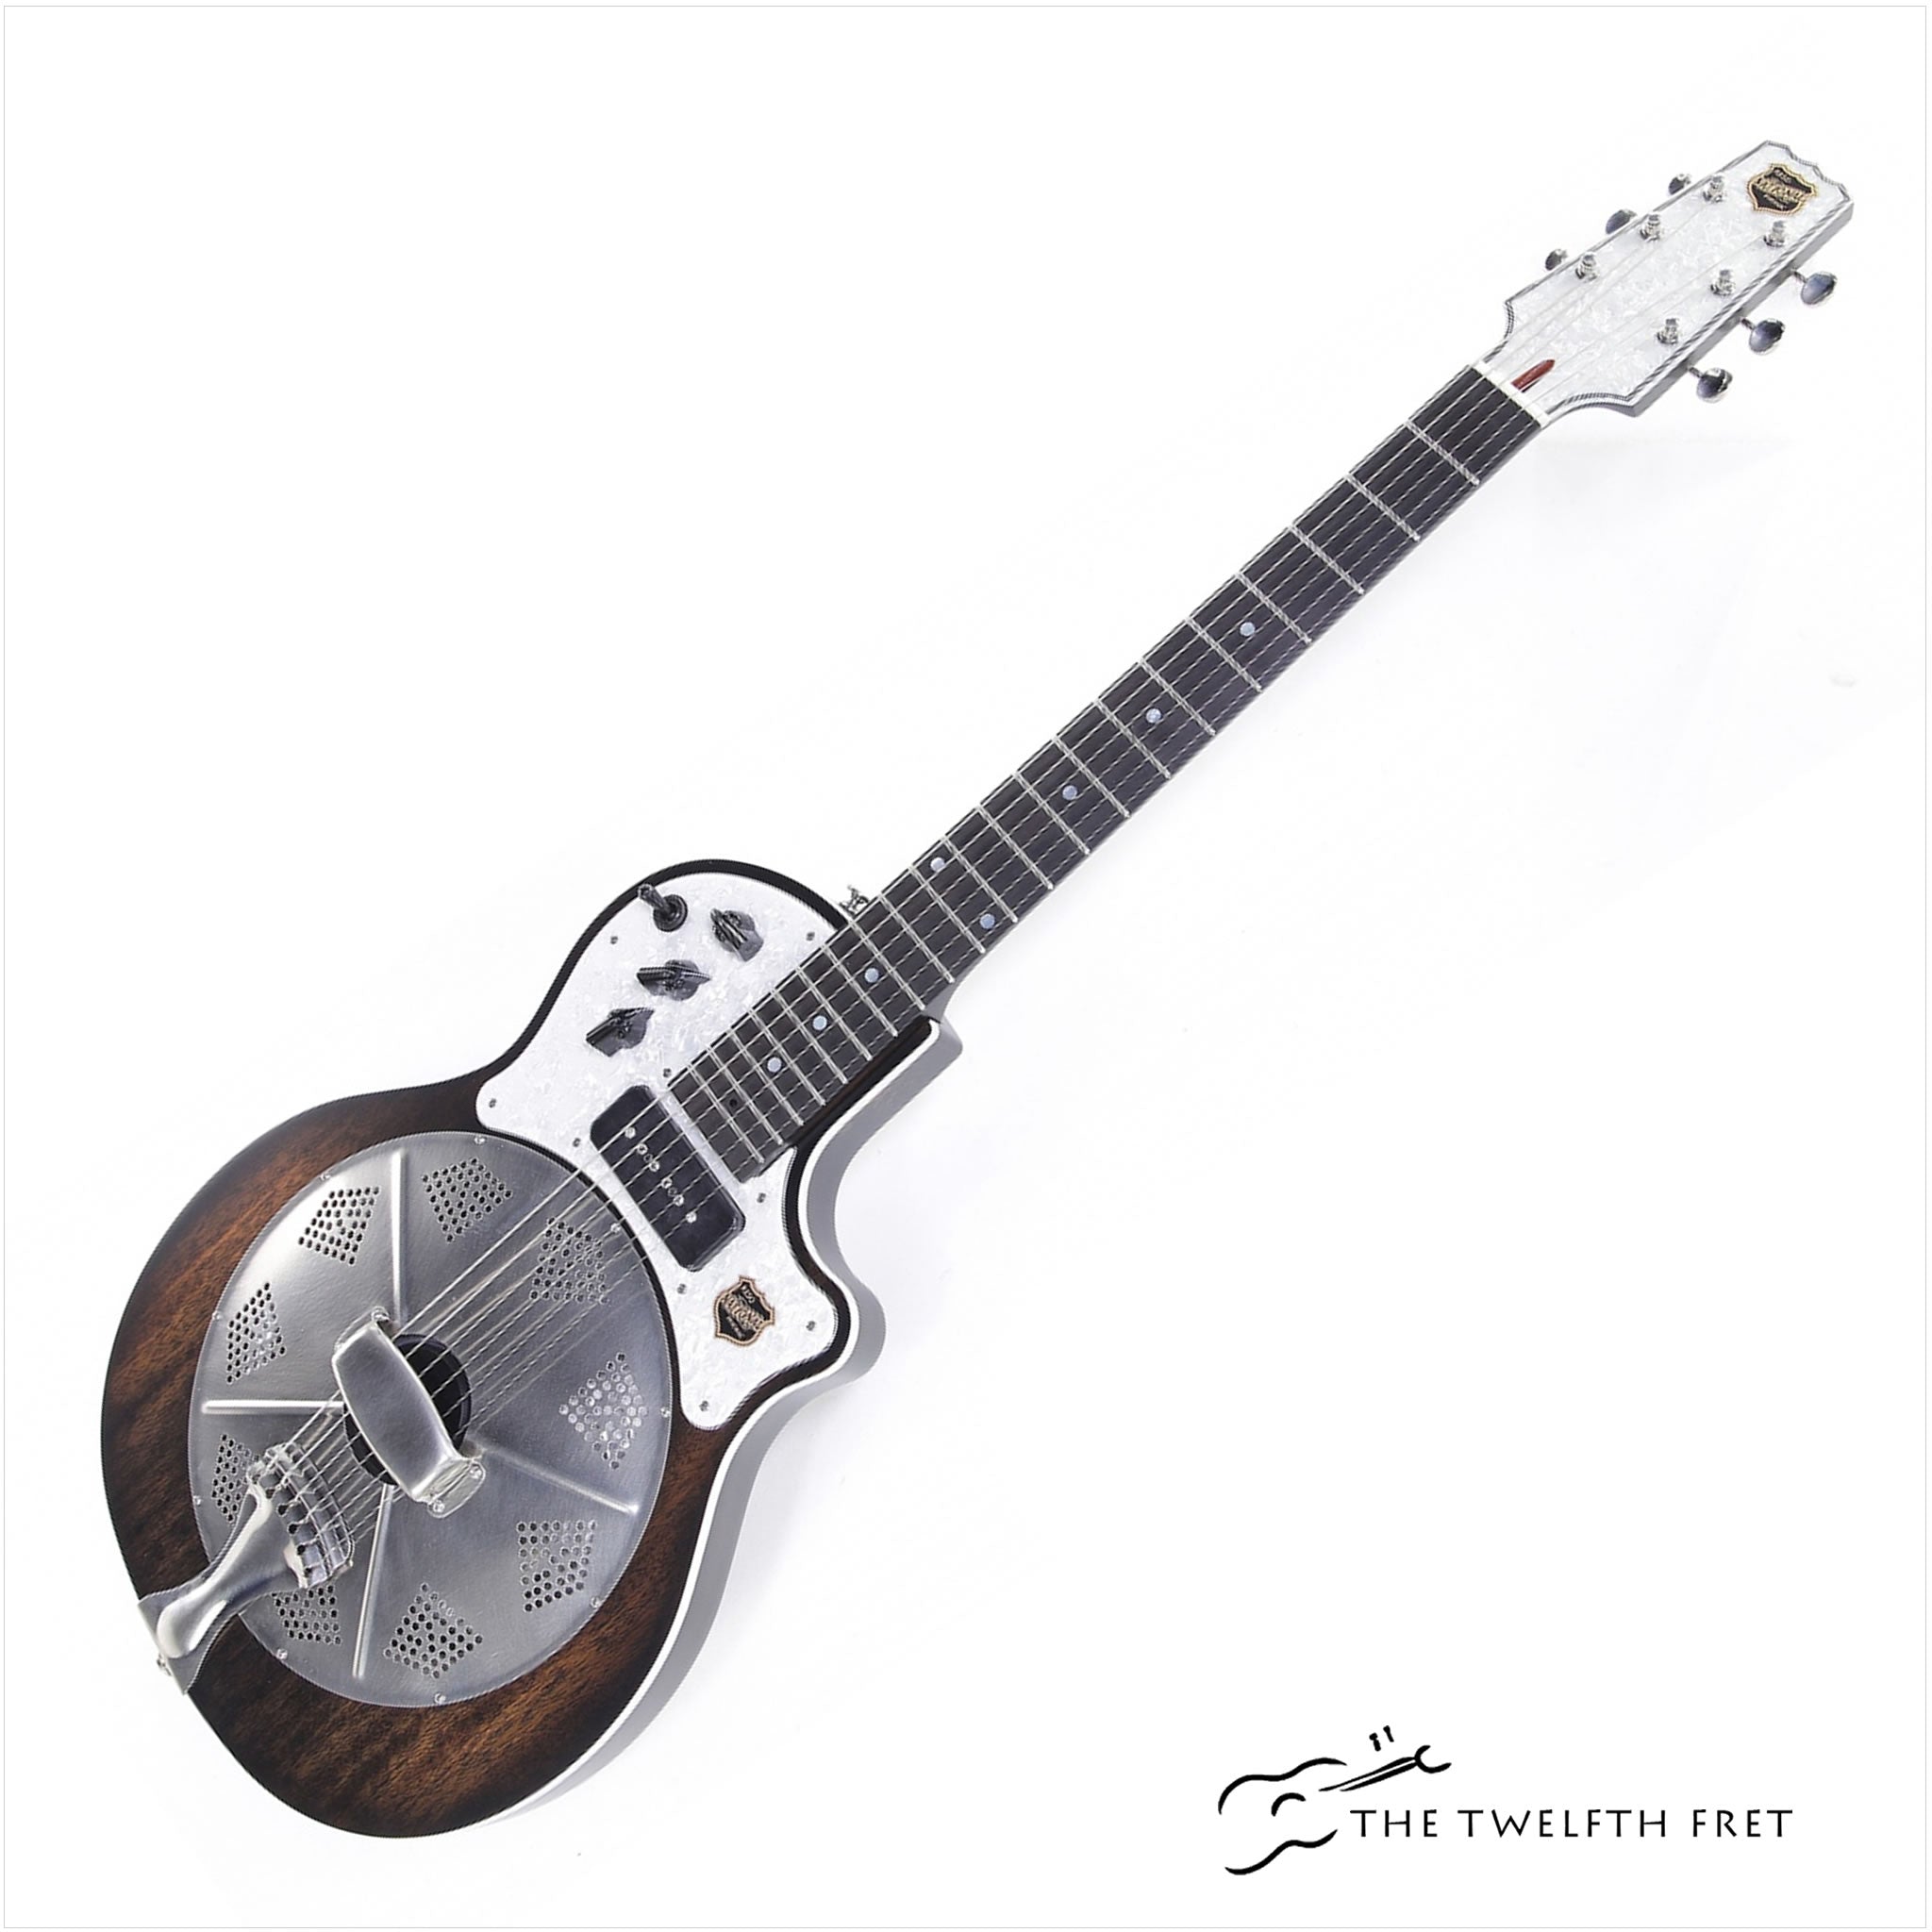 National Resolectric Resophonic Guitar (REVOLVER) - The Twelfth Fret